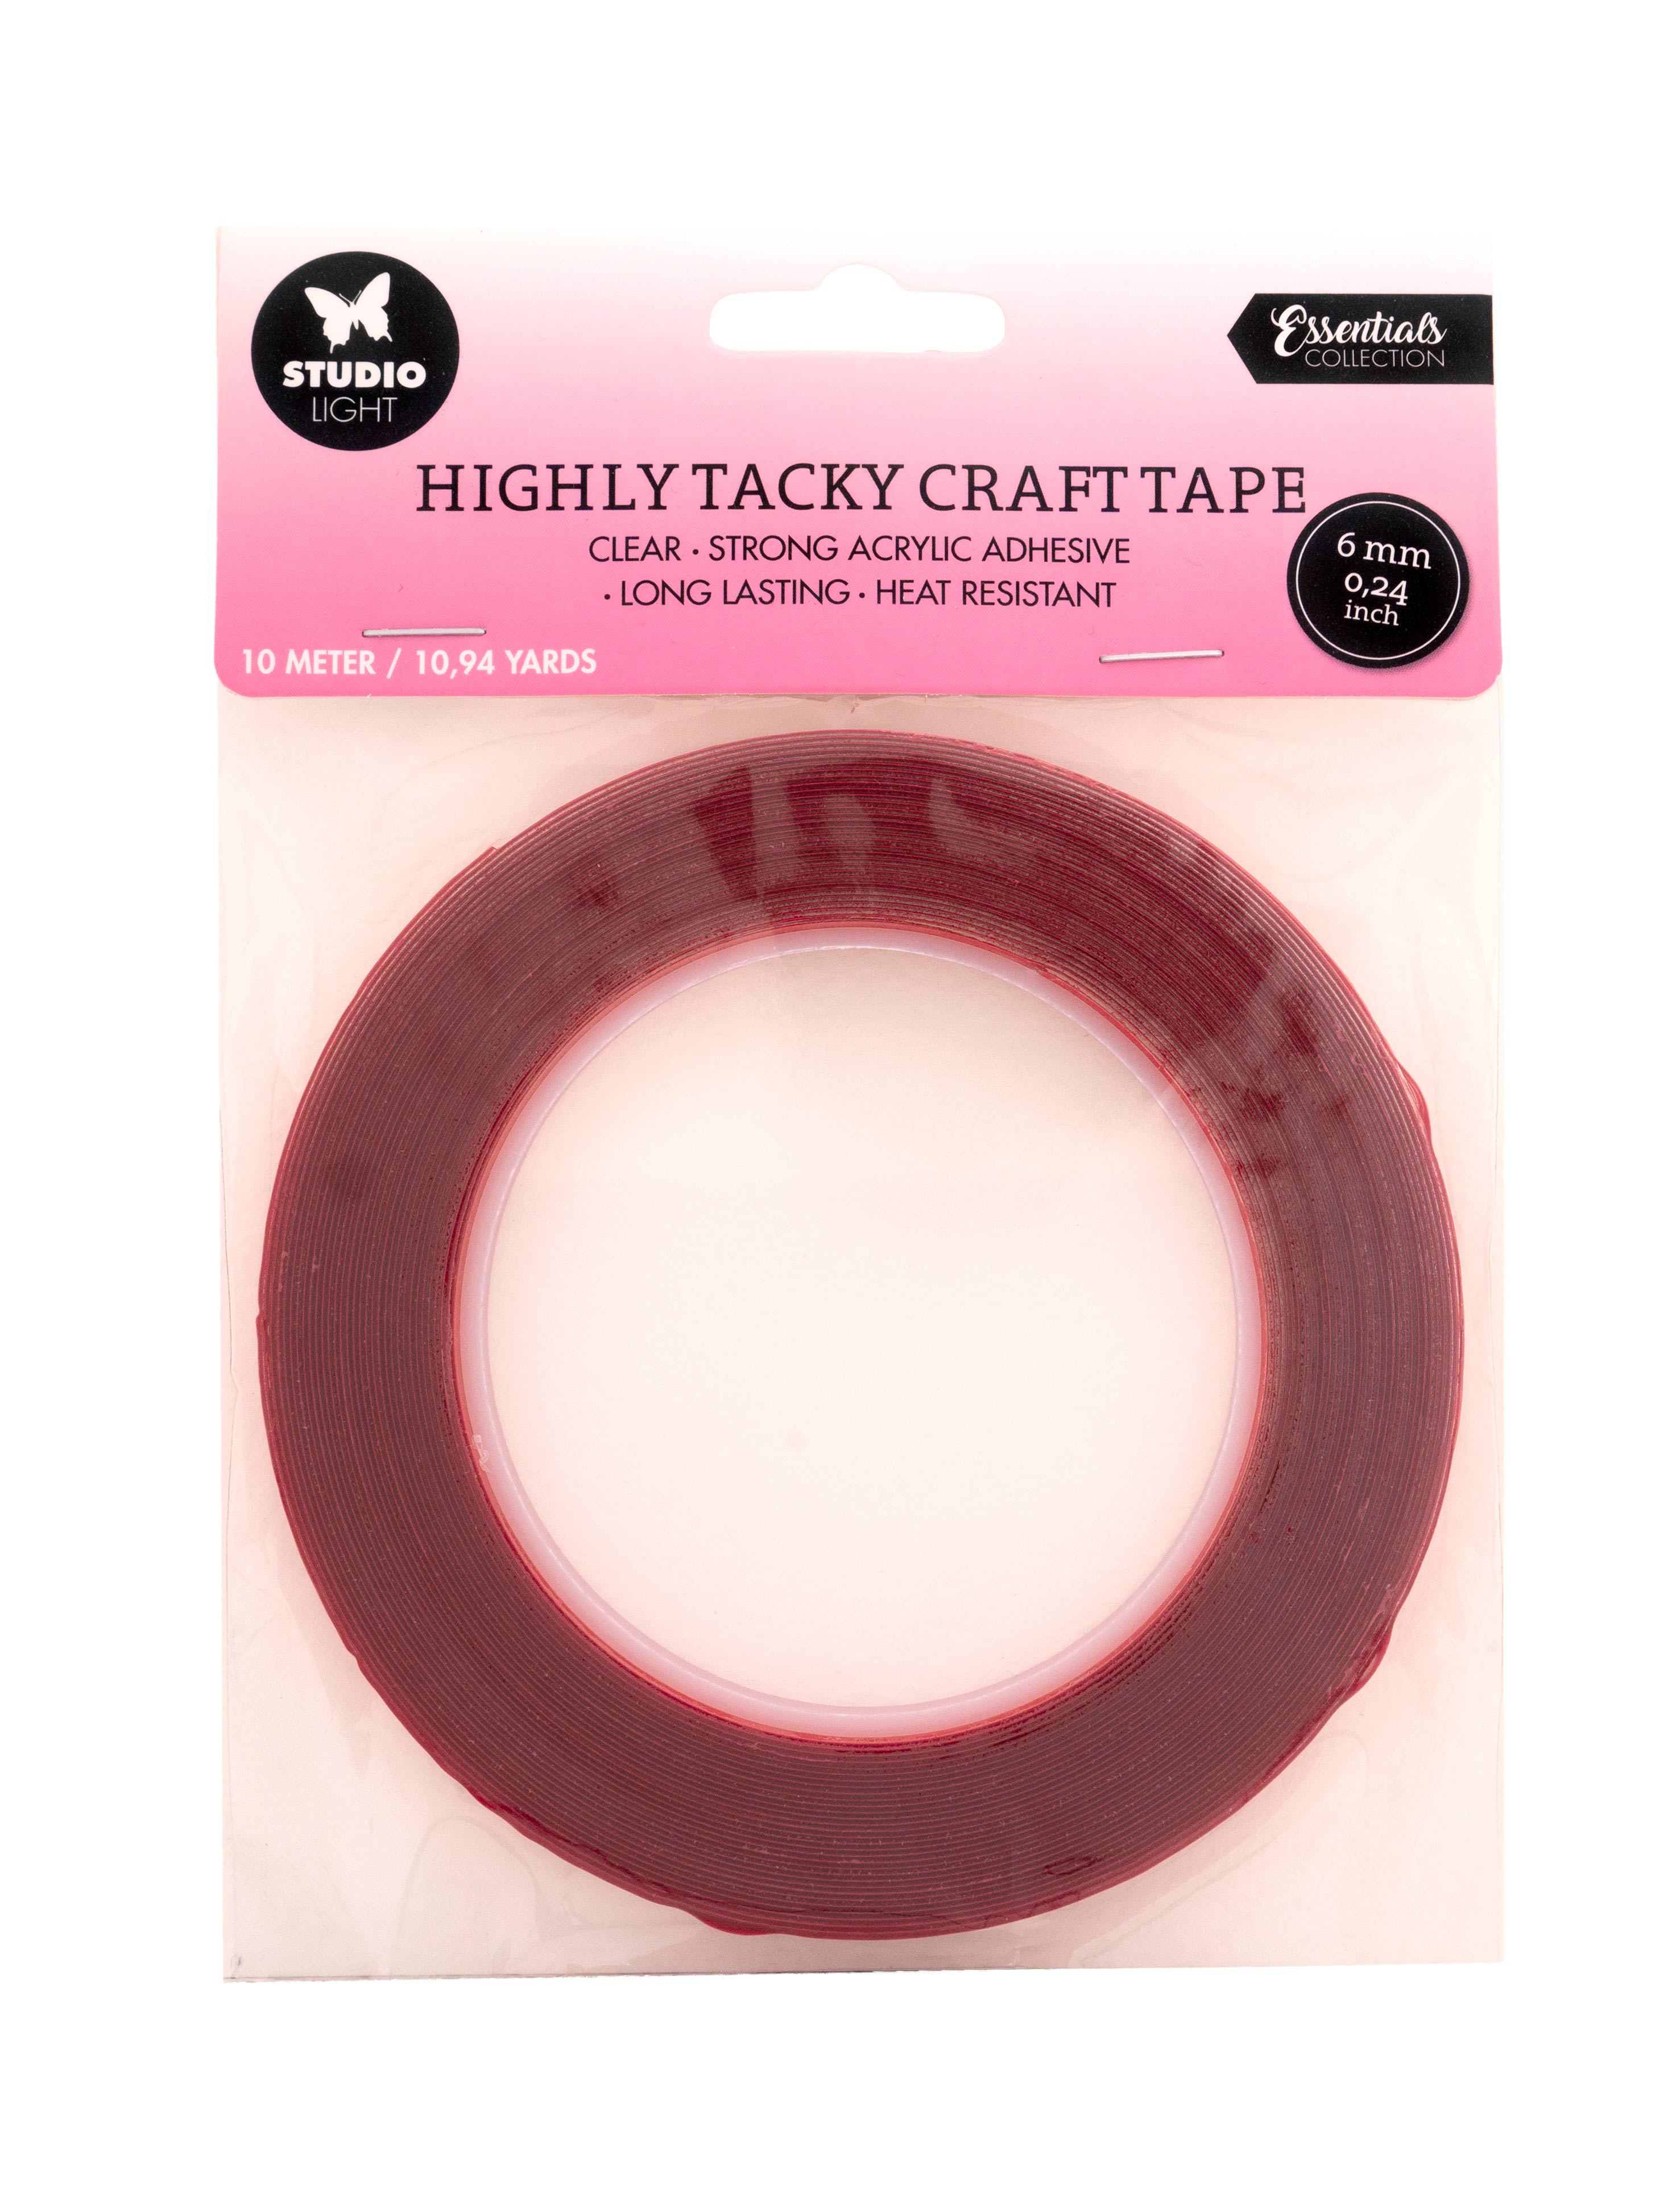 SL Highly Tacky Craft Tape Doublesided Adhesive 6mm Essential Tools 165x130x6mm 10 M nr.02